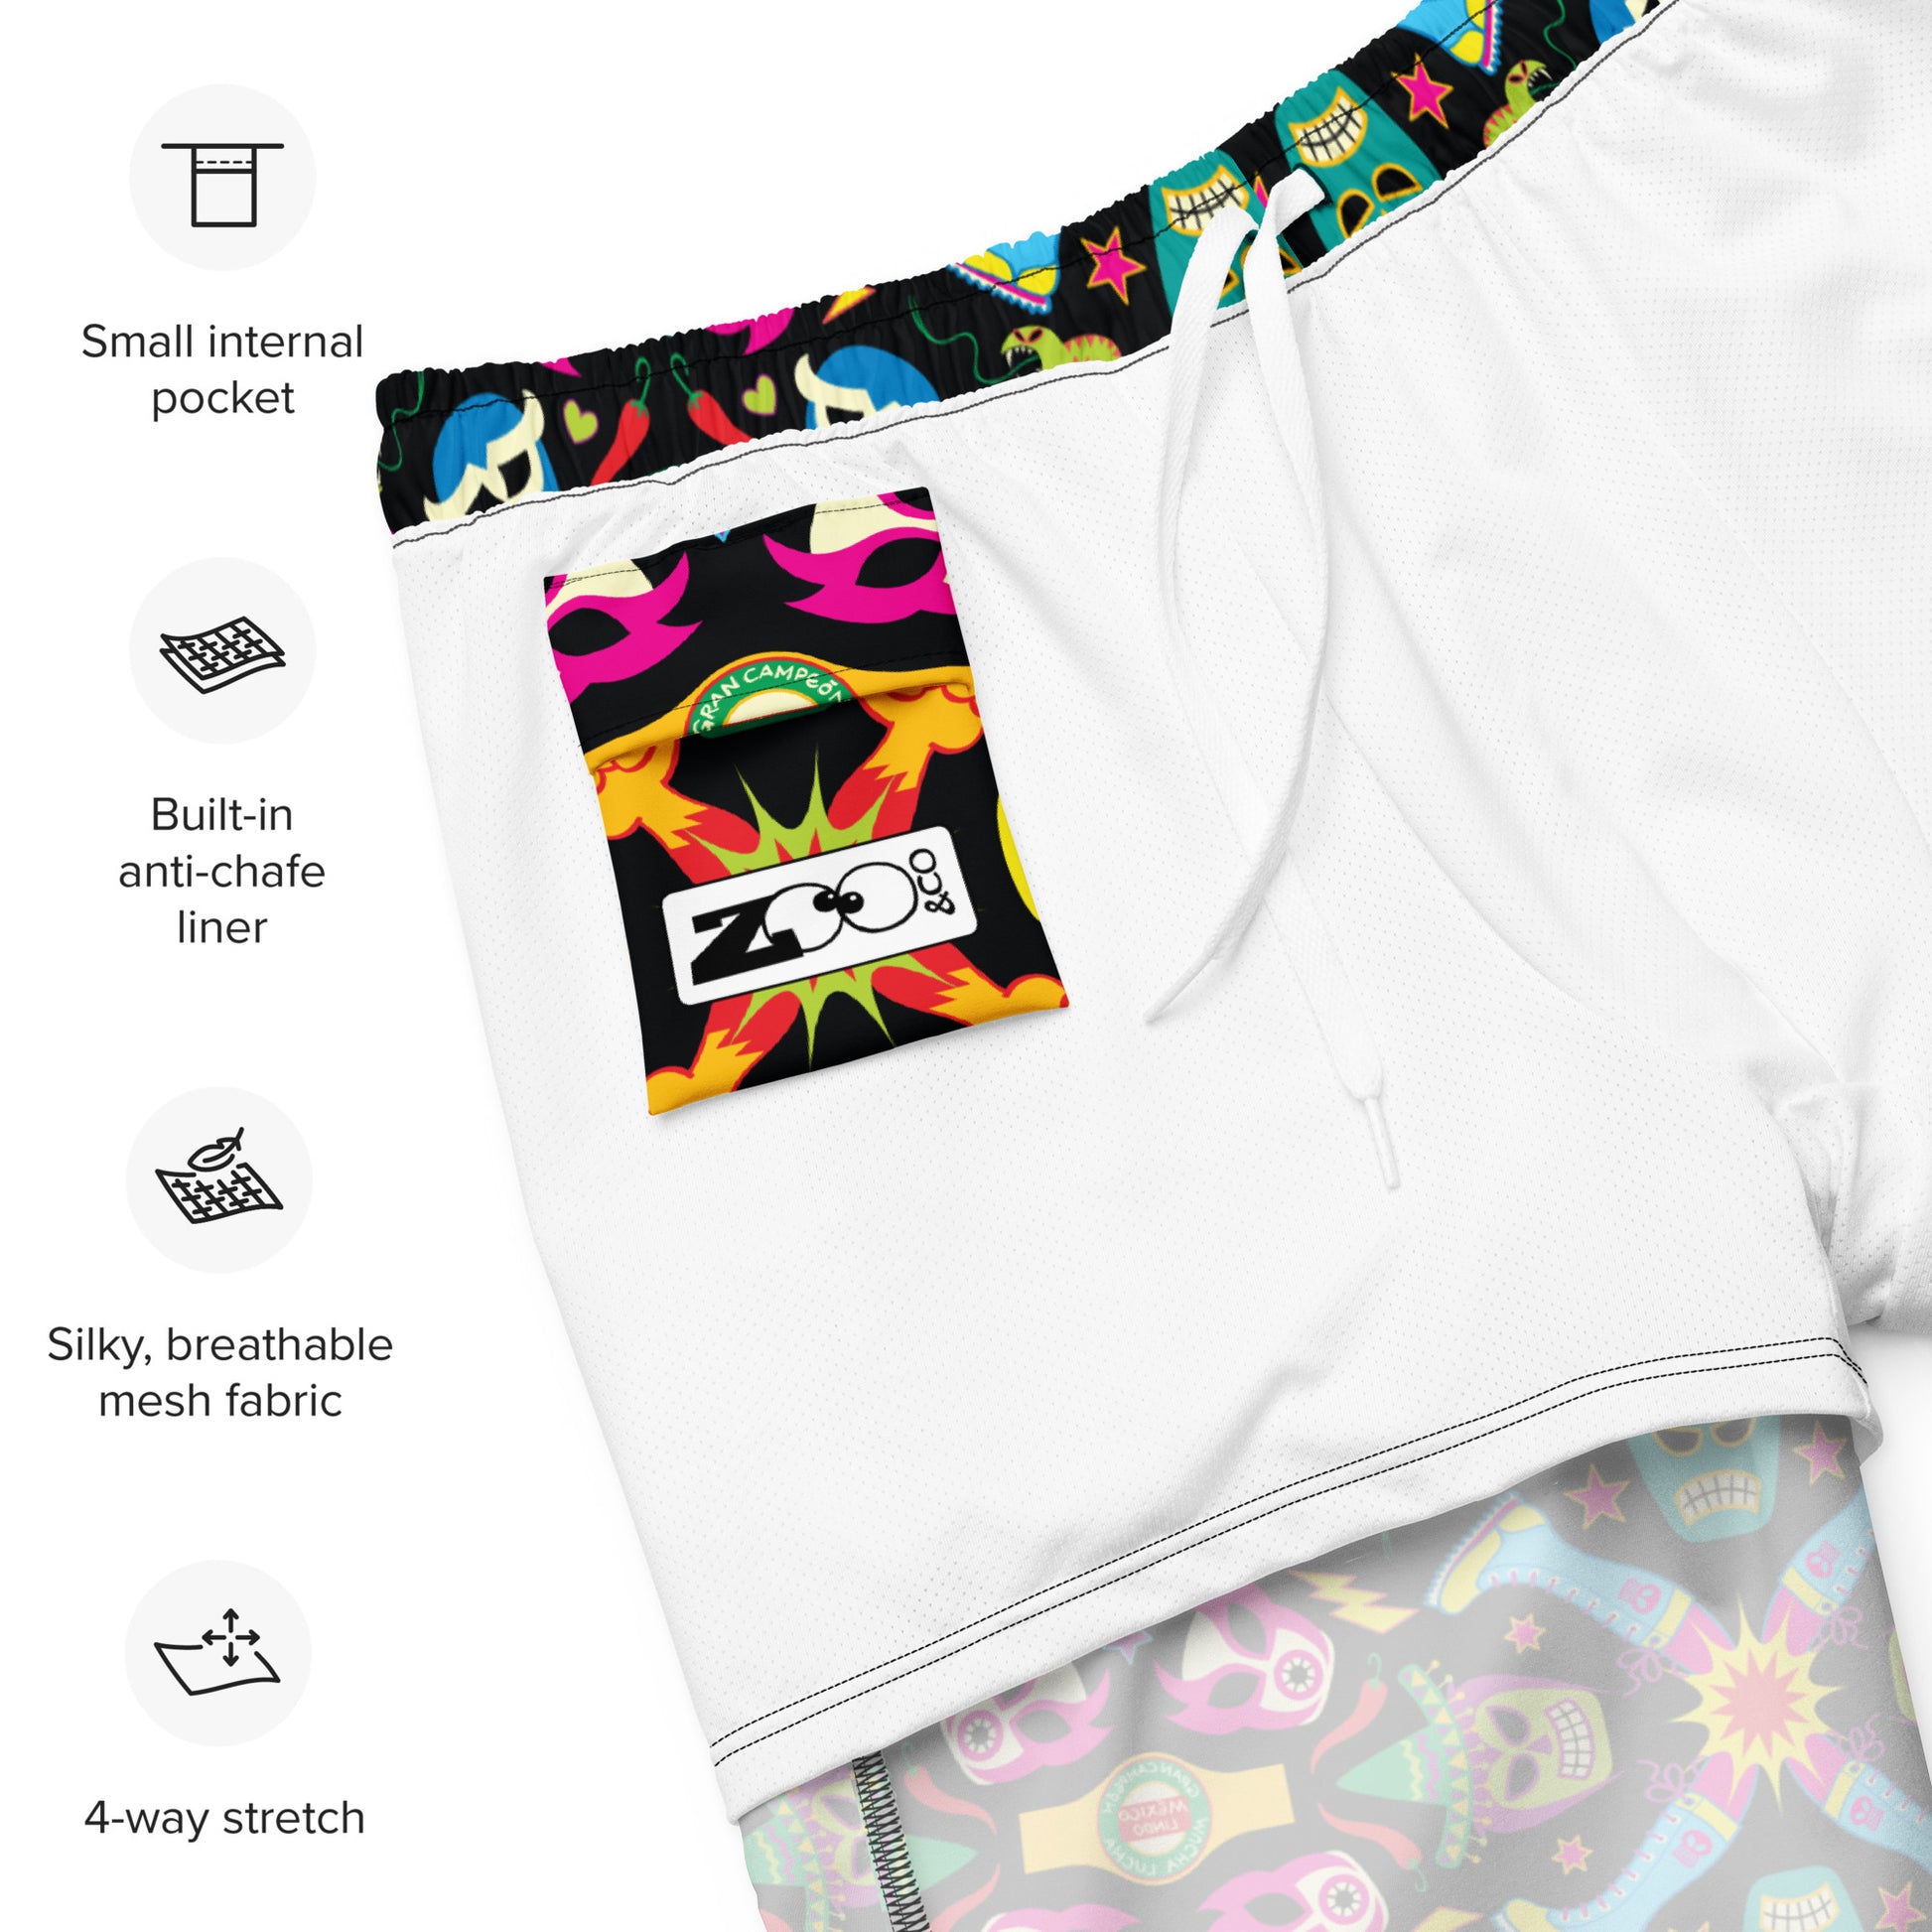 Mexican wrestling colorful party Men's swim trunks. Product specification. Interior pocket details